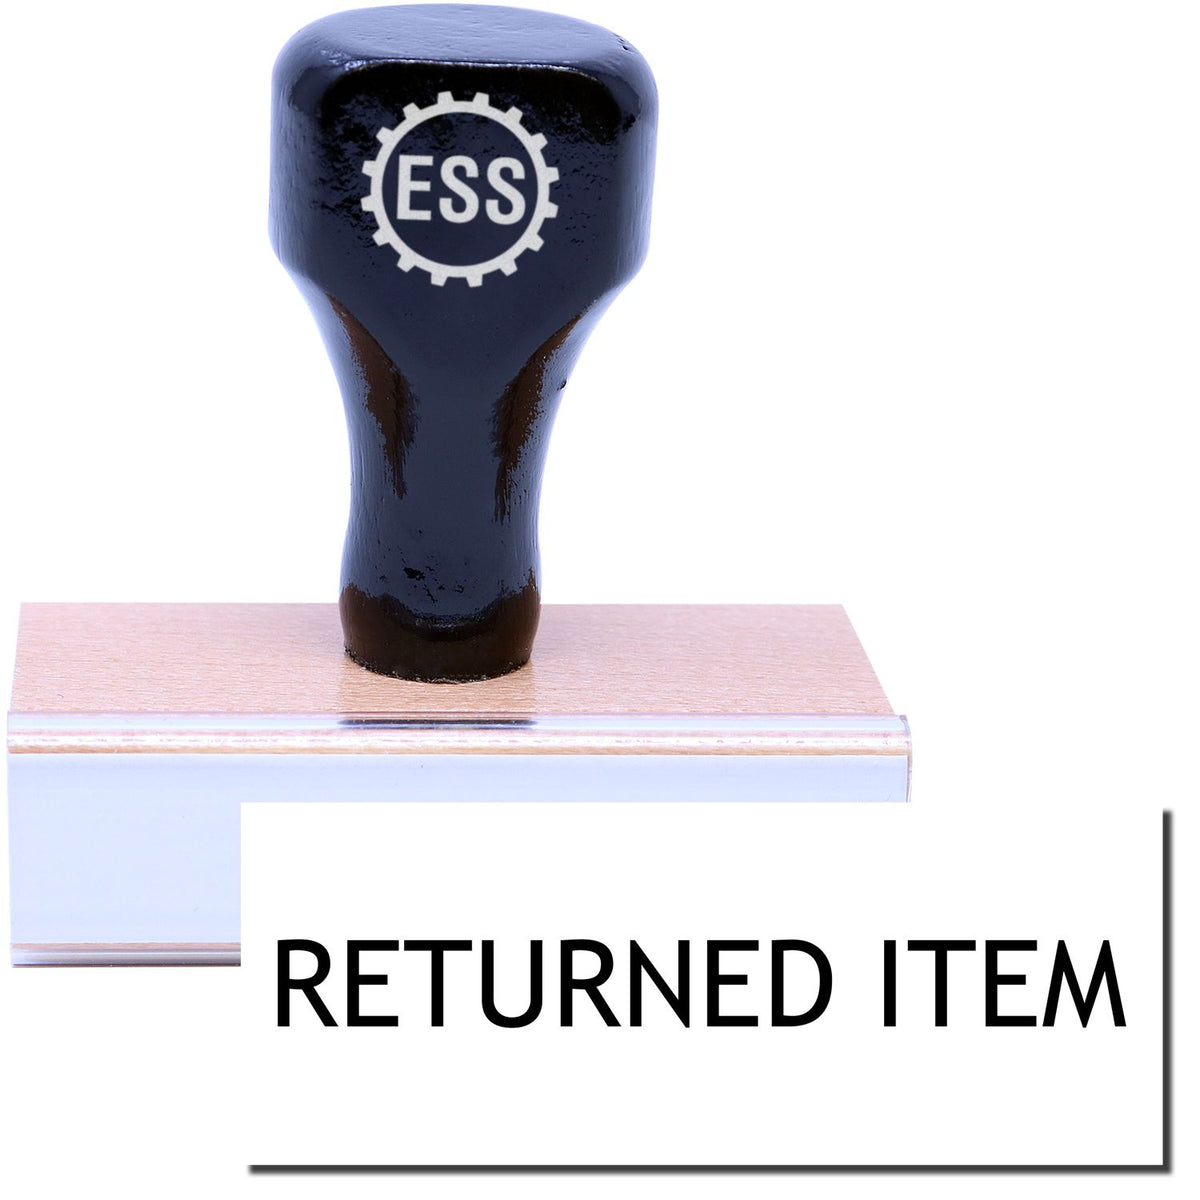 A stock office rubber stamp with a stamped image showing how the text &quot;RETURNED ITEM&quot; in a large font is displayed after stamping.